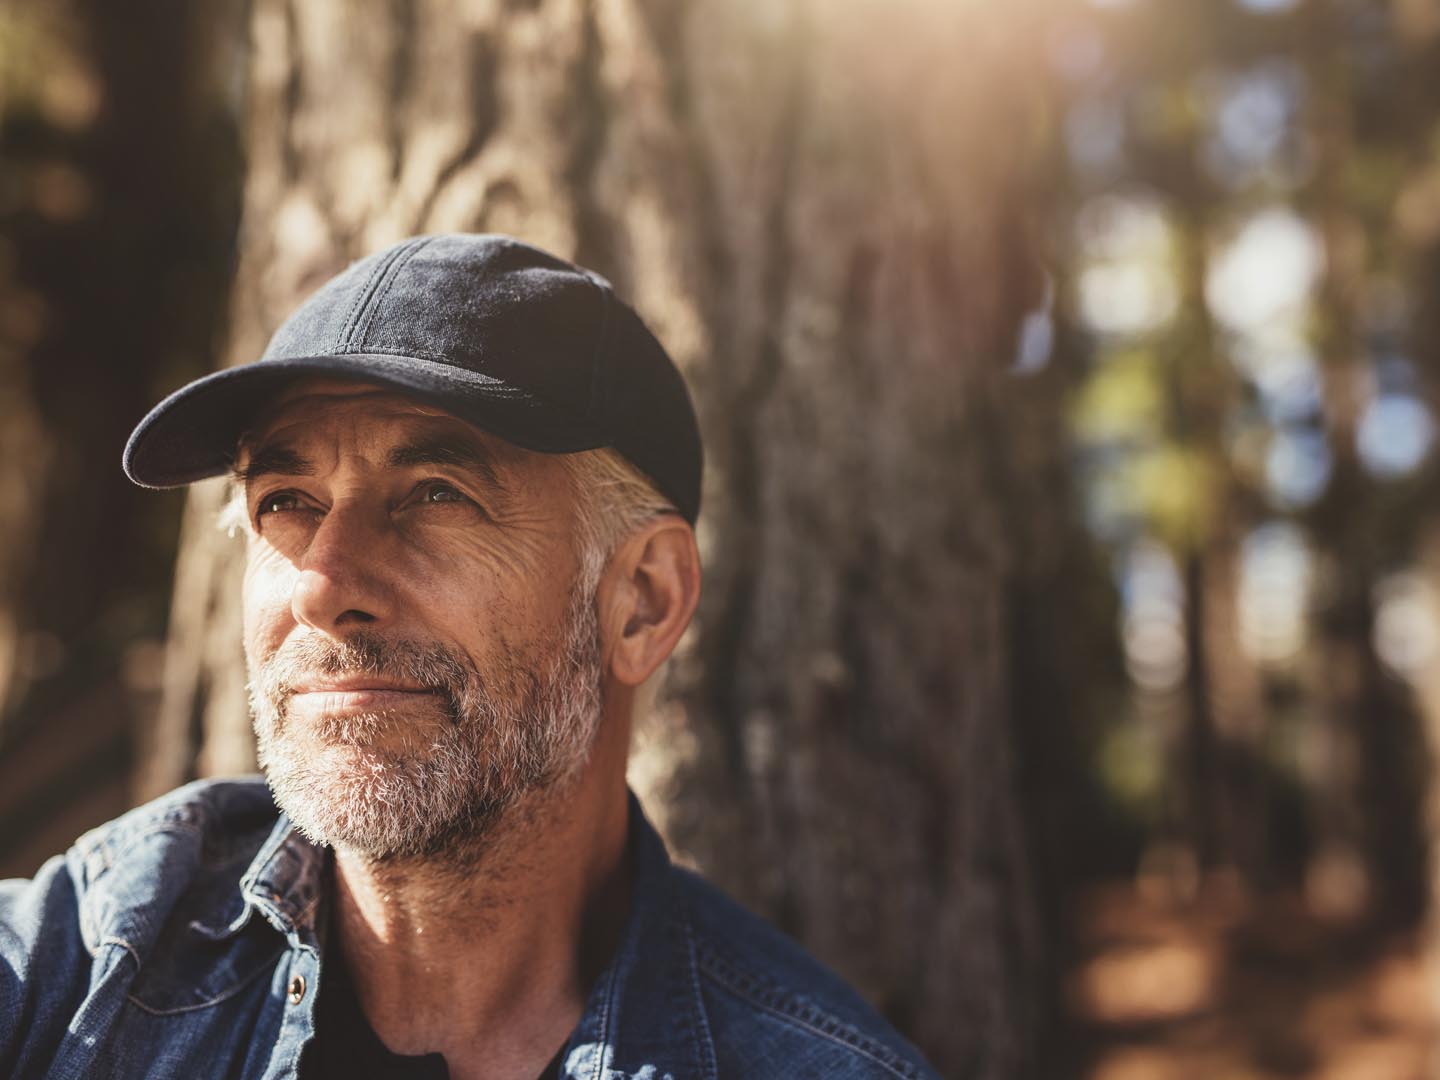 Close up portrait of senior man wearing cap looking away. Mature man with beard sitting in woods on a summer day.